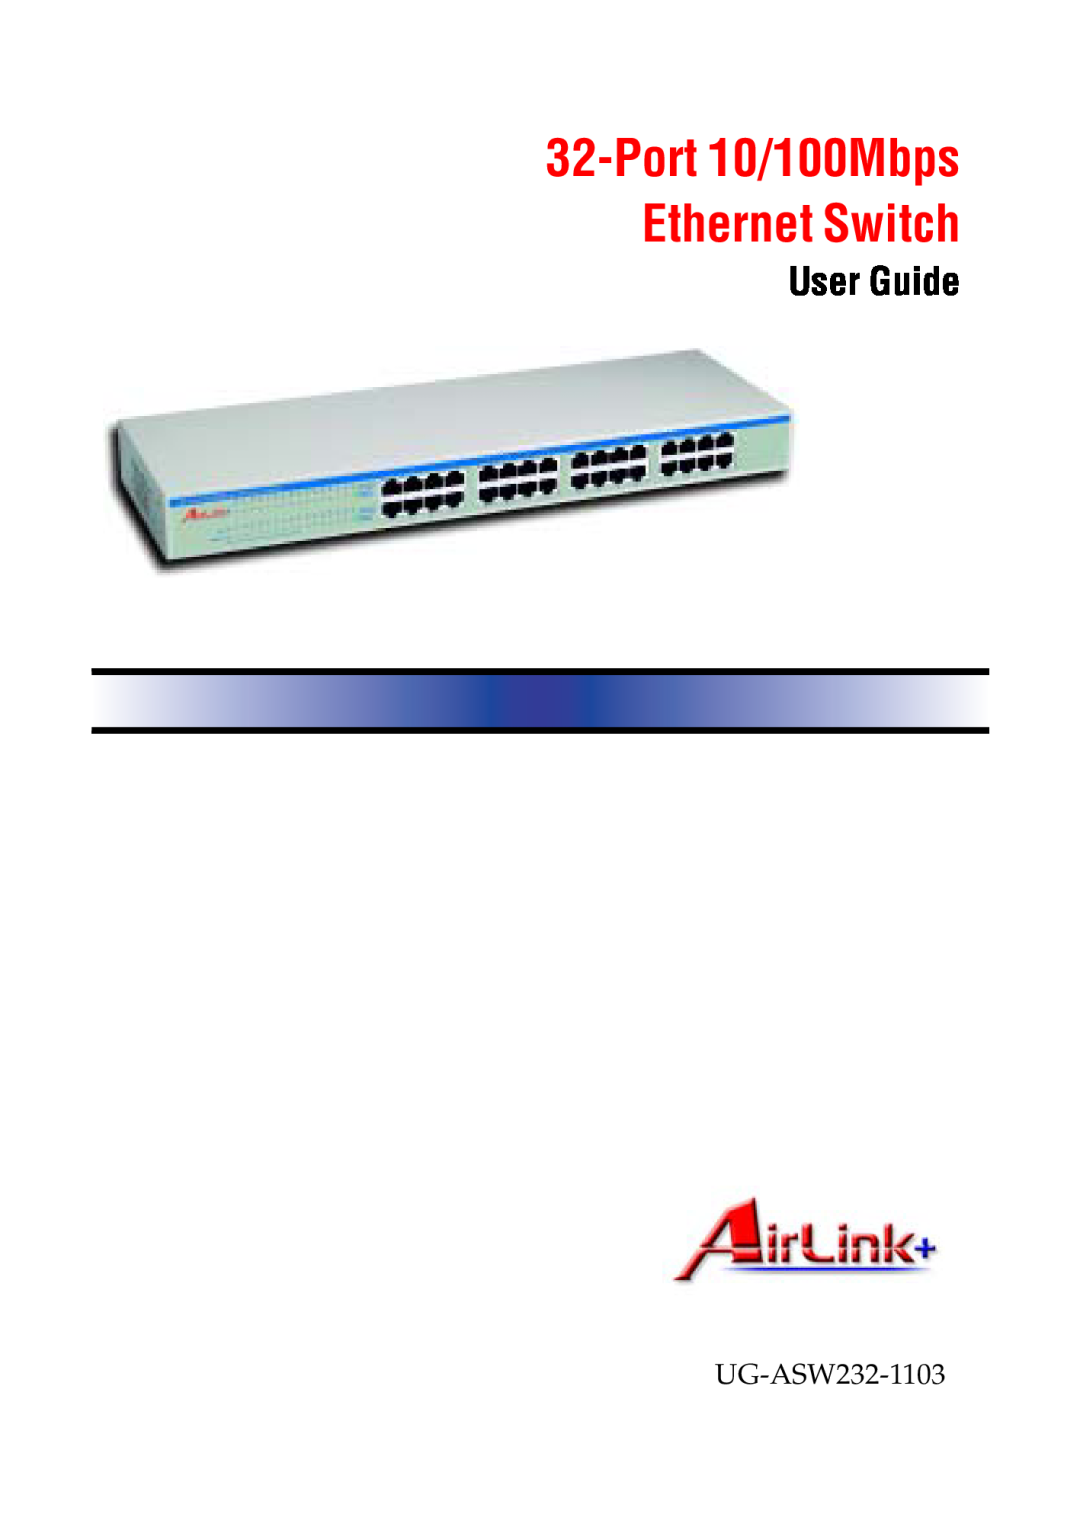 Airlink UG-ASW232-1103 manual Port 10/100Mbps Ethernet Switch User Guide, AirLink+ 